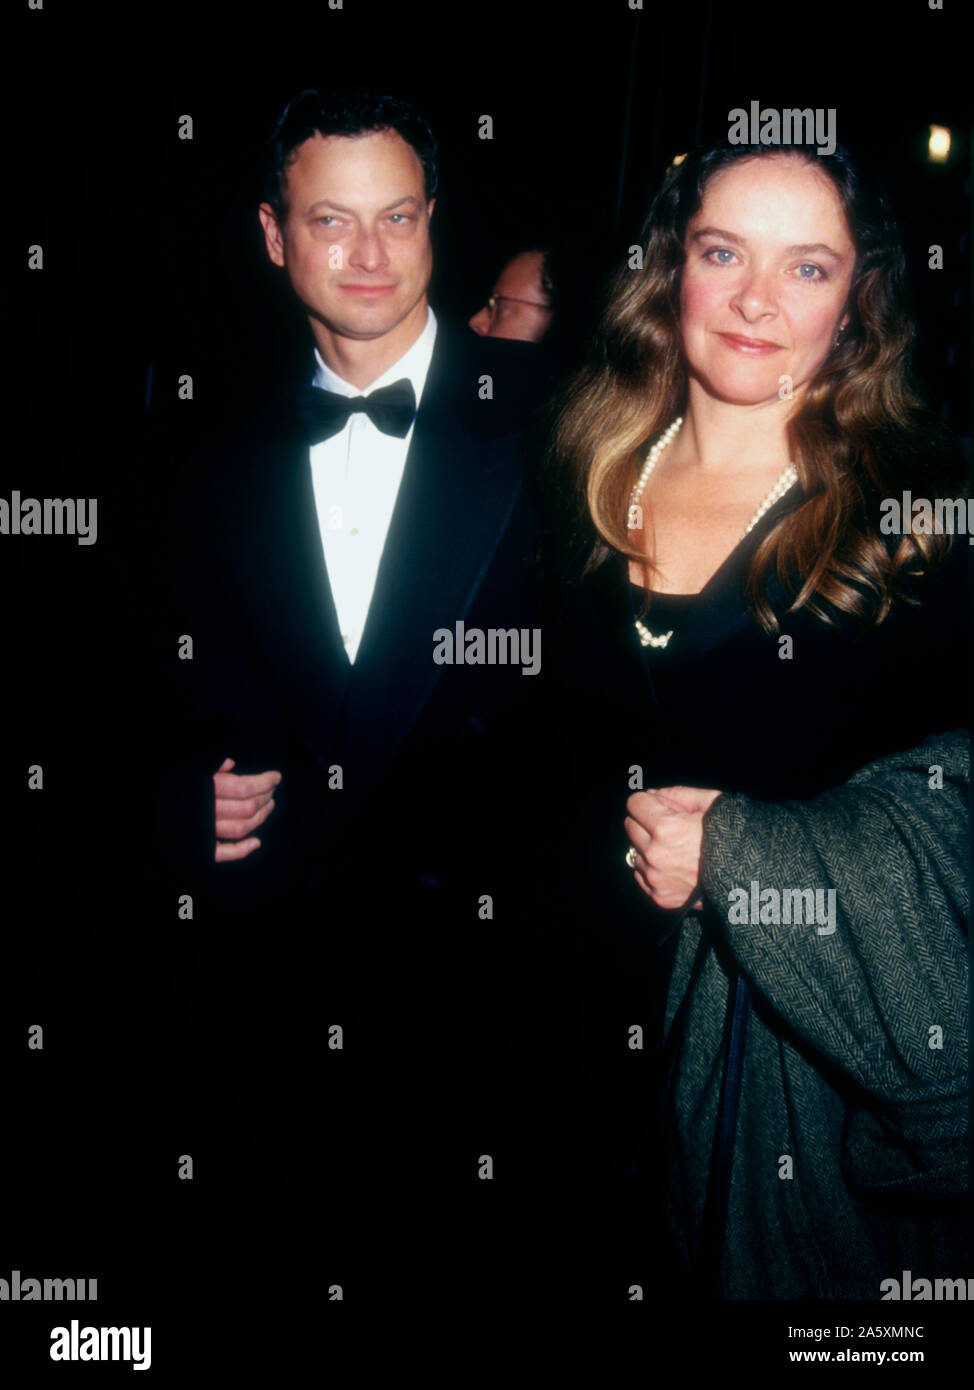 Beverly Hills, California, USA 2nd March 1995 Actor Gary Sinise and wife Moira Harris attend the 23rd Annual American Film Institute (AFI) Lifetime Achievement Award Salute to Steven Spielberg on March 2, 1995 at the Beverly Hilton Hotel in Beverly Hills, California, USA. Photo by Barry King/Alamy Stock Photo Stock Photo